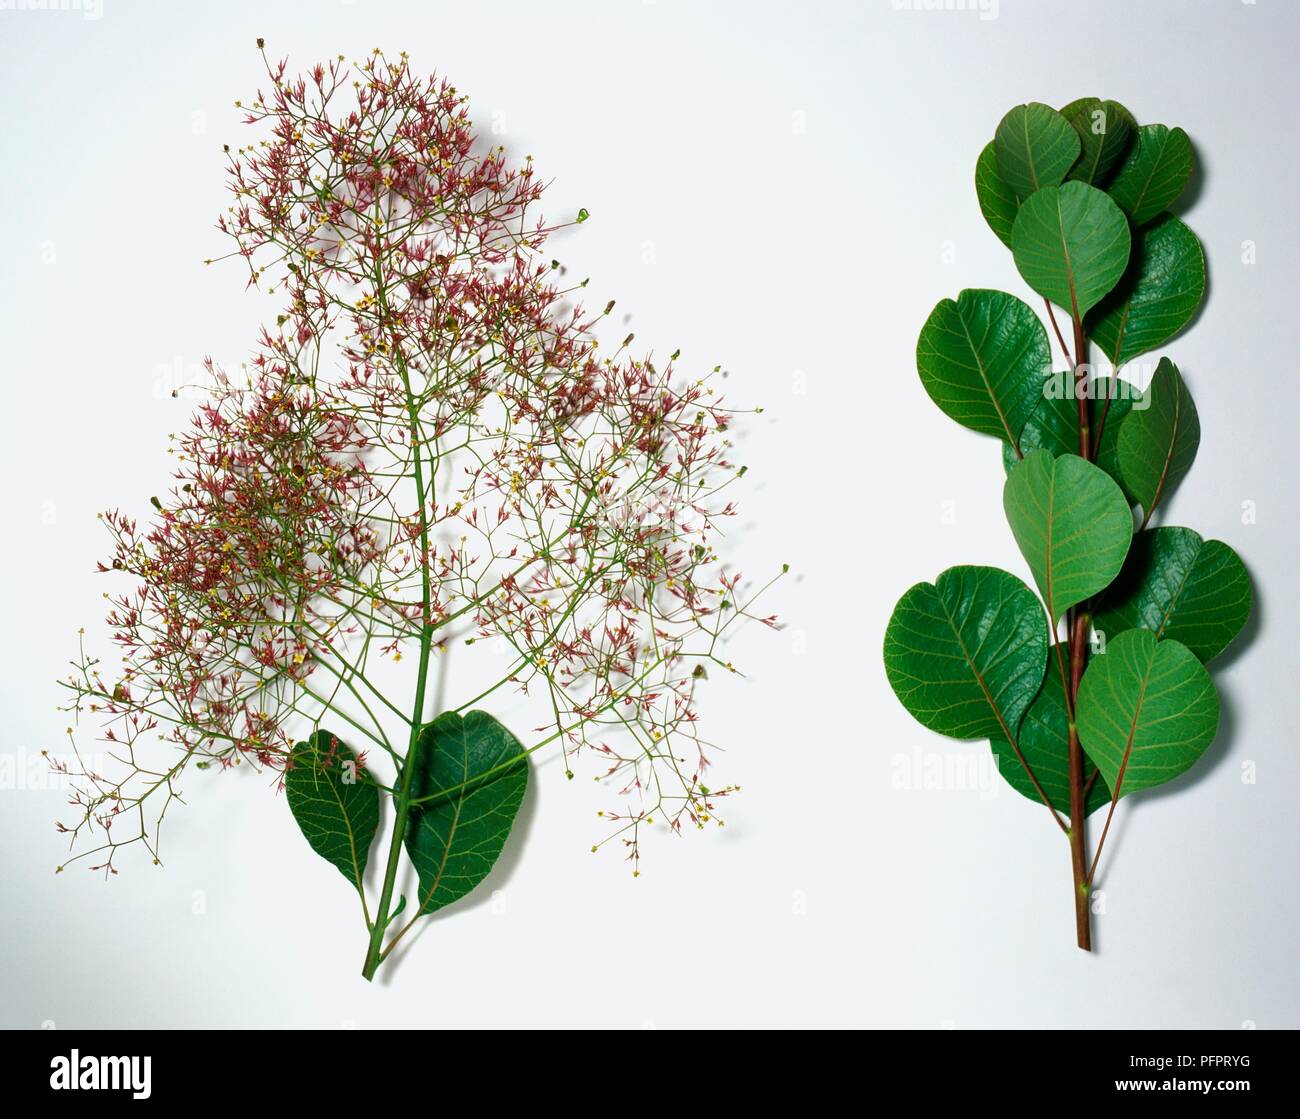 Cotinus coggygria (Smoke tree), stem with flowers and another stem with leaves Stock Photo